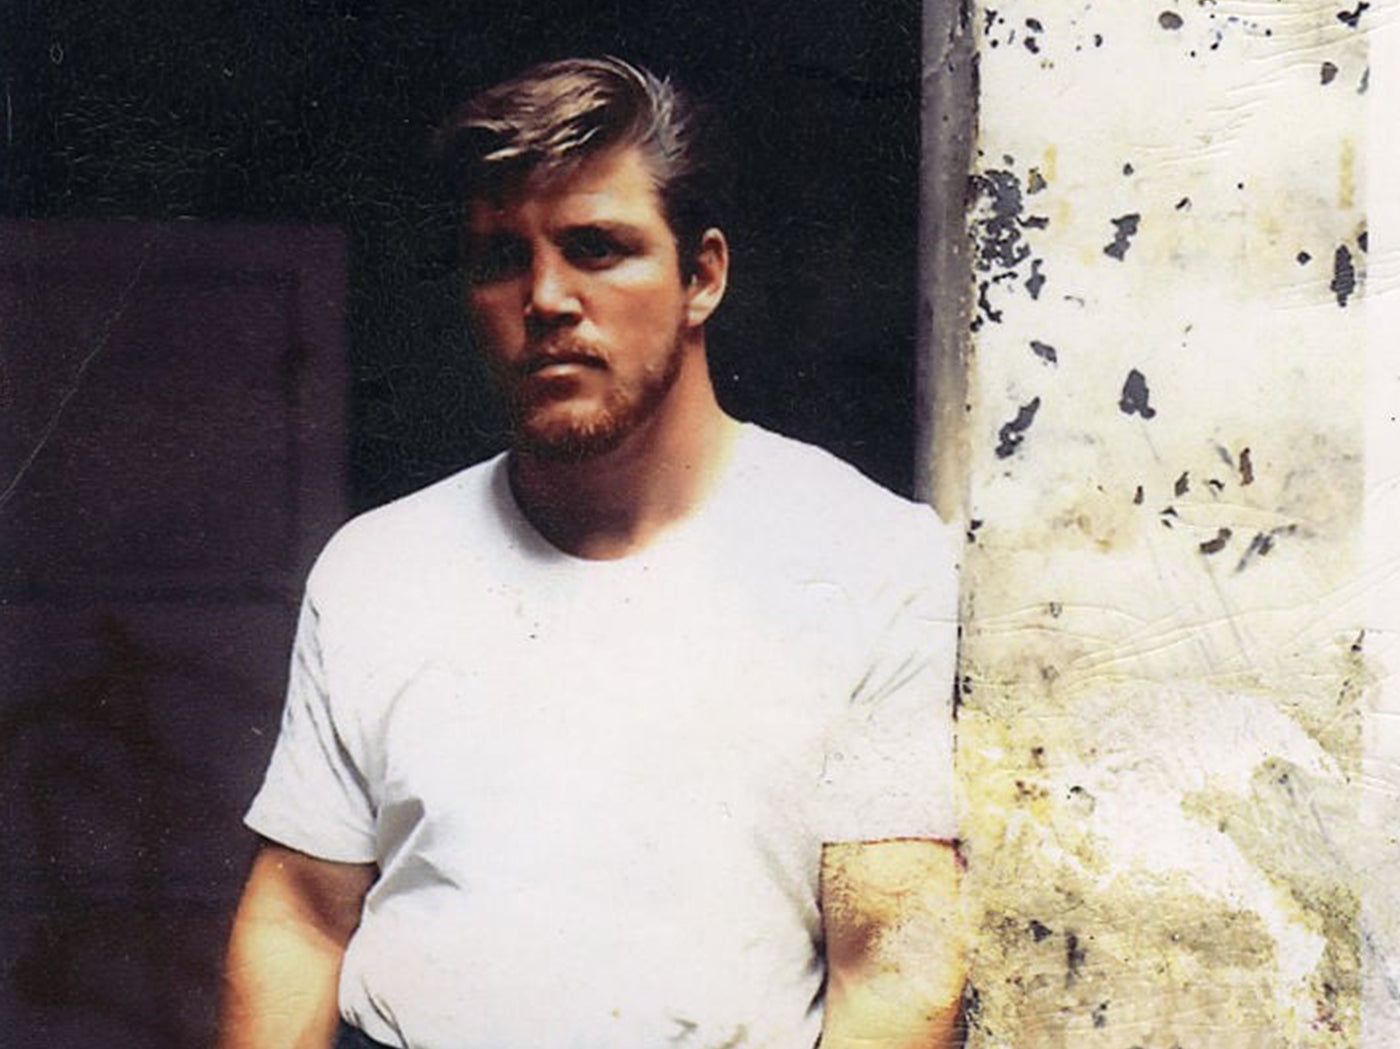 THE JERRY QUARRY STORY